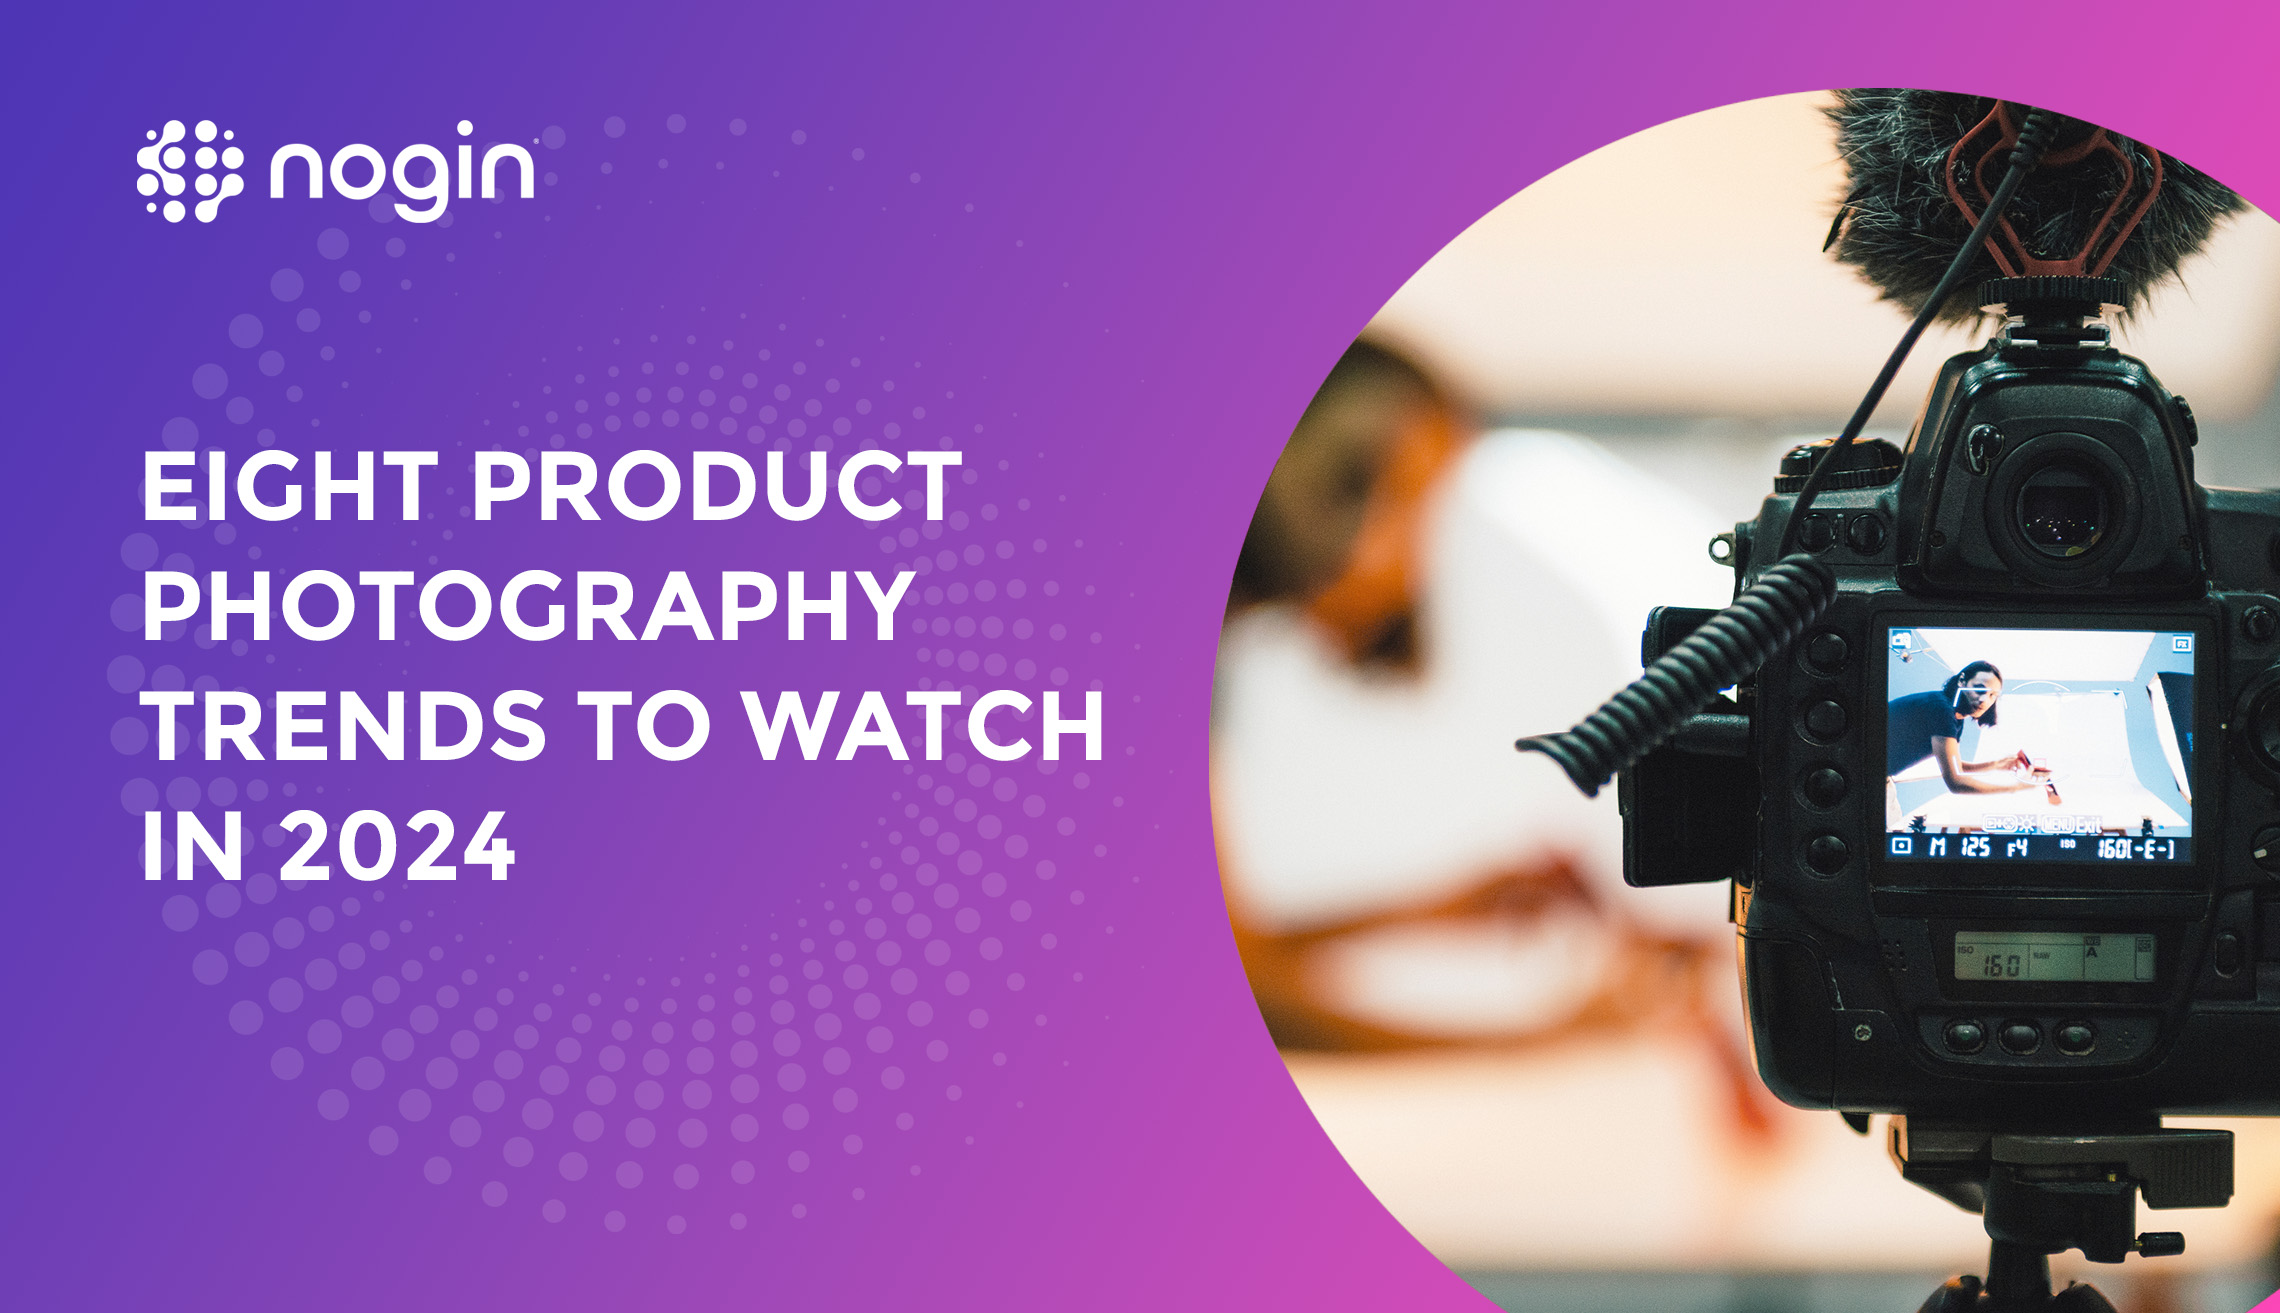 Eight product photography trends to watch in 2024